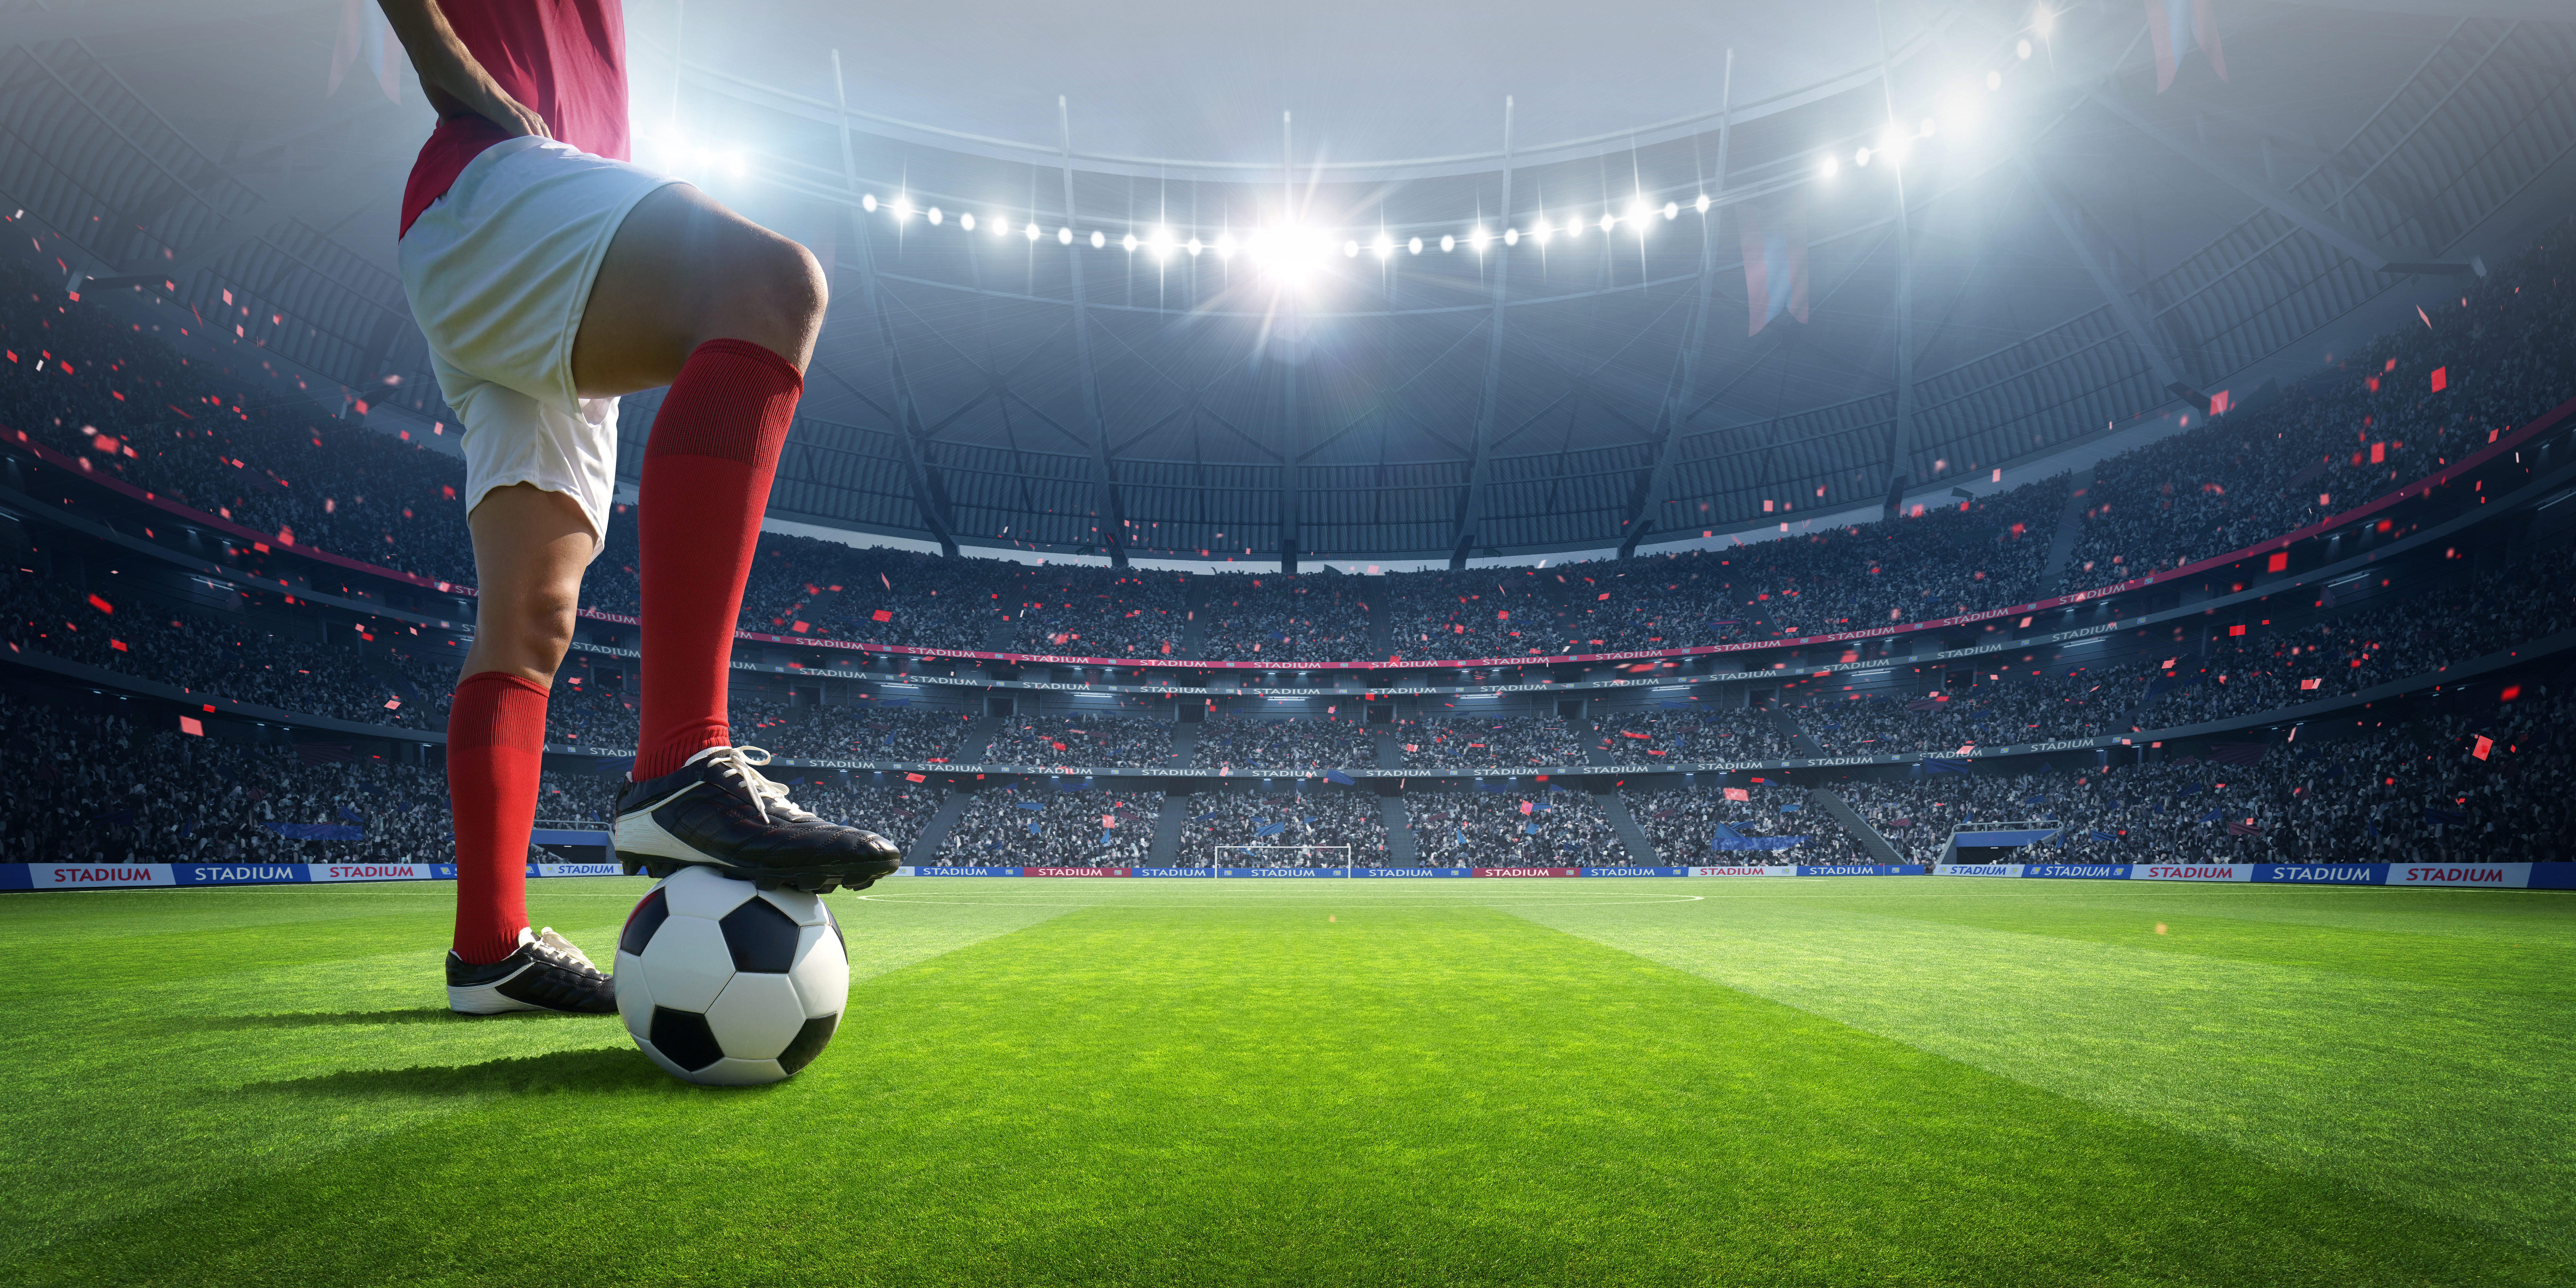 A football player in the stadium | Source: Shutterstock